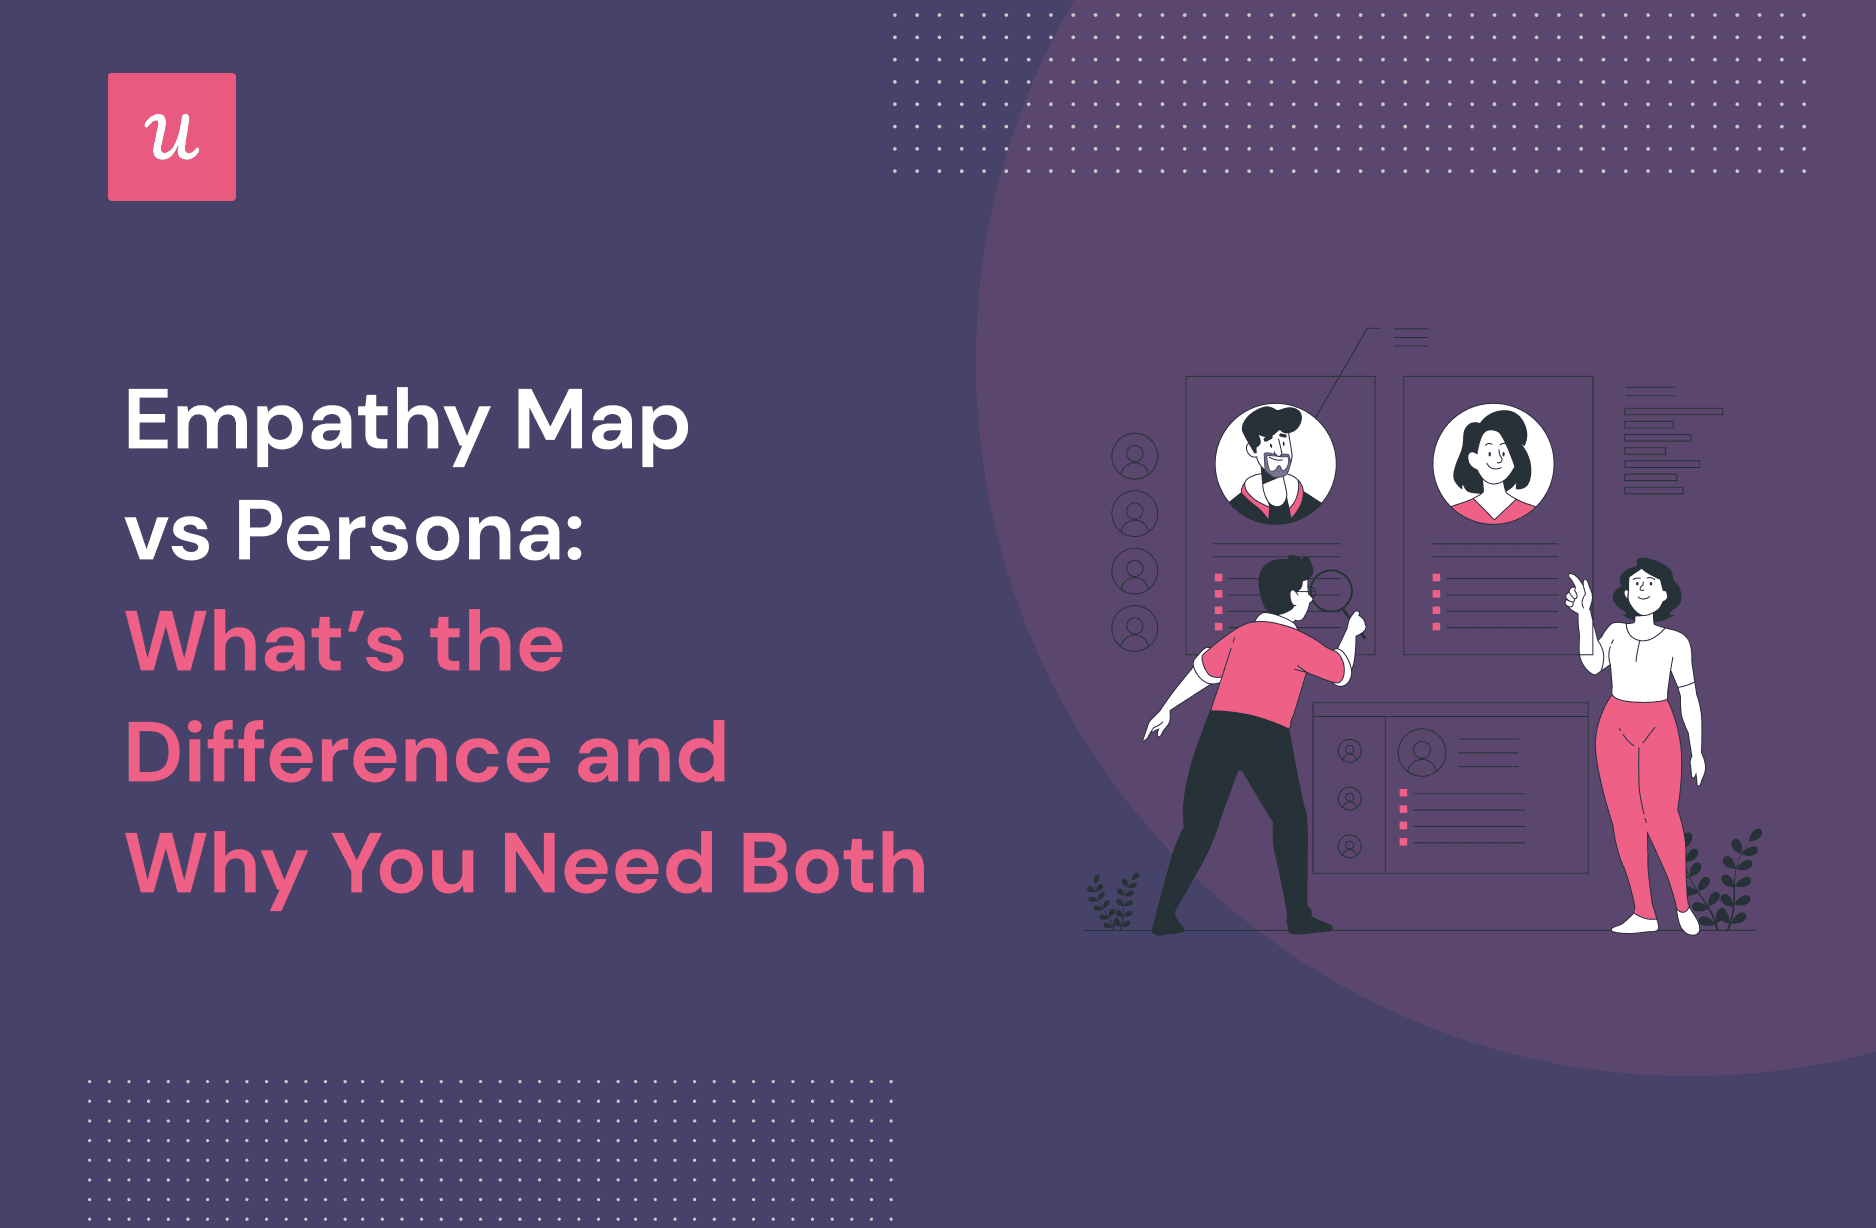 Empathy Map vs Persona: What’s the Difference and Why Do You Need Both? cover